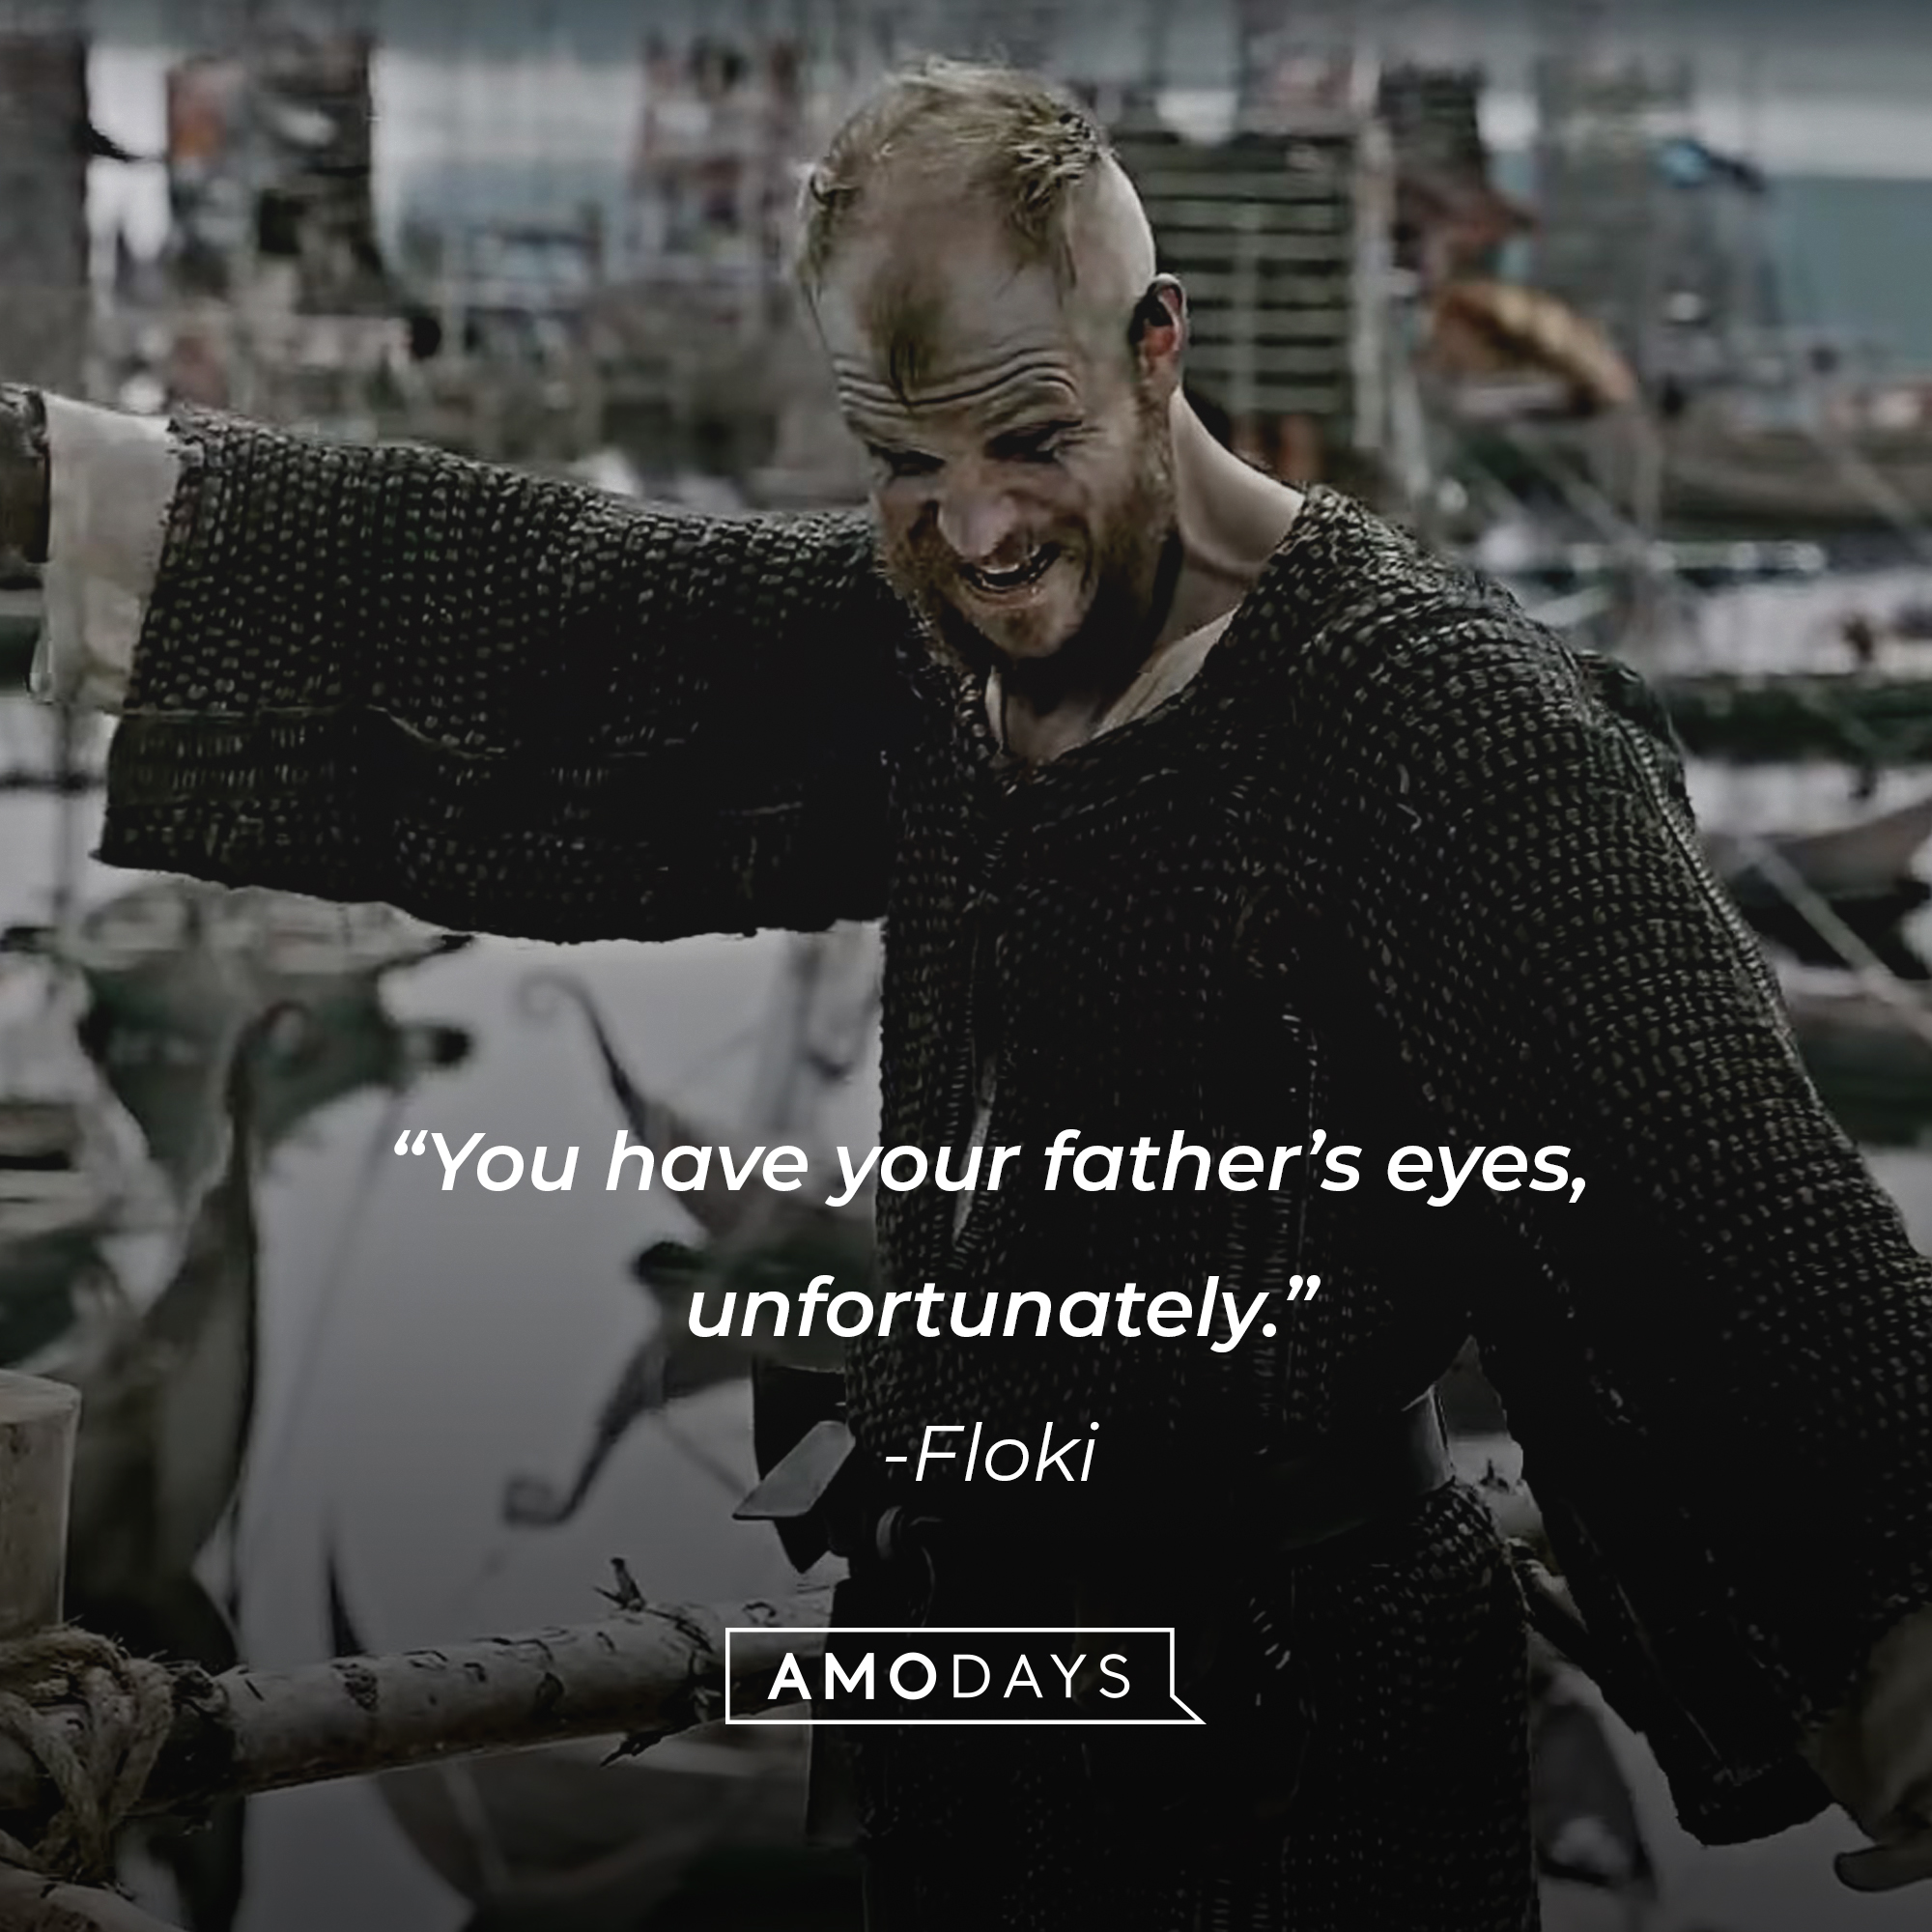 An image of Floki with his quote: “You have your father’s eyes, unfortunately.” | Source: facebook.com/Vikings